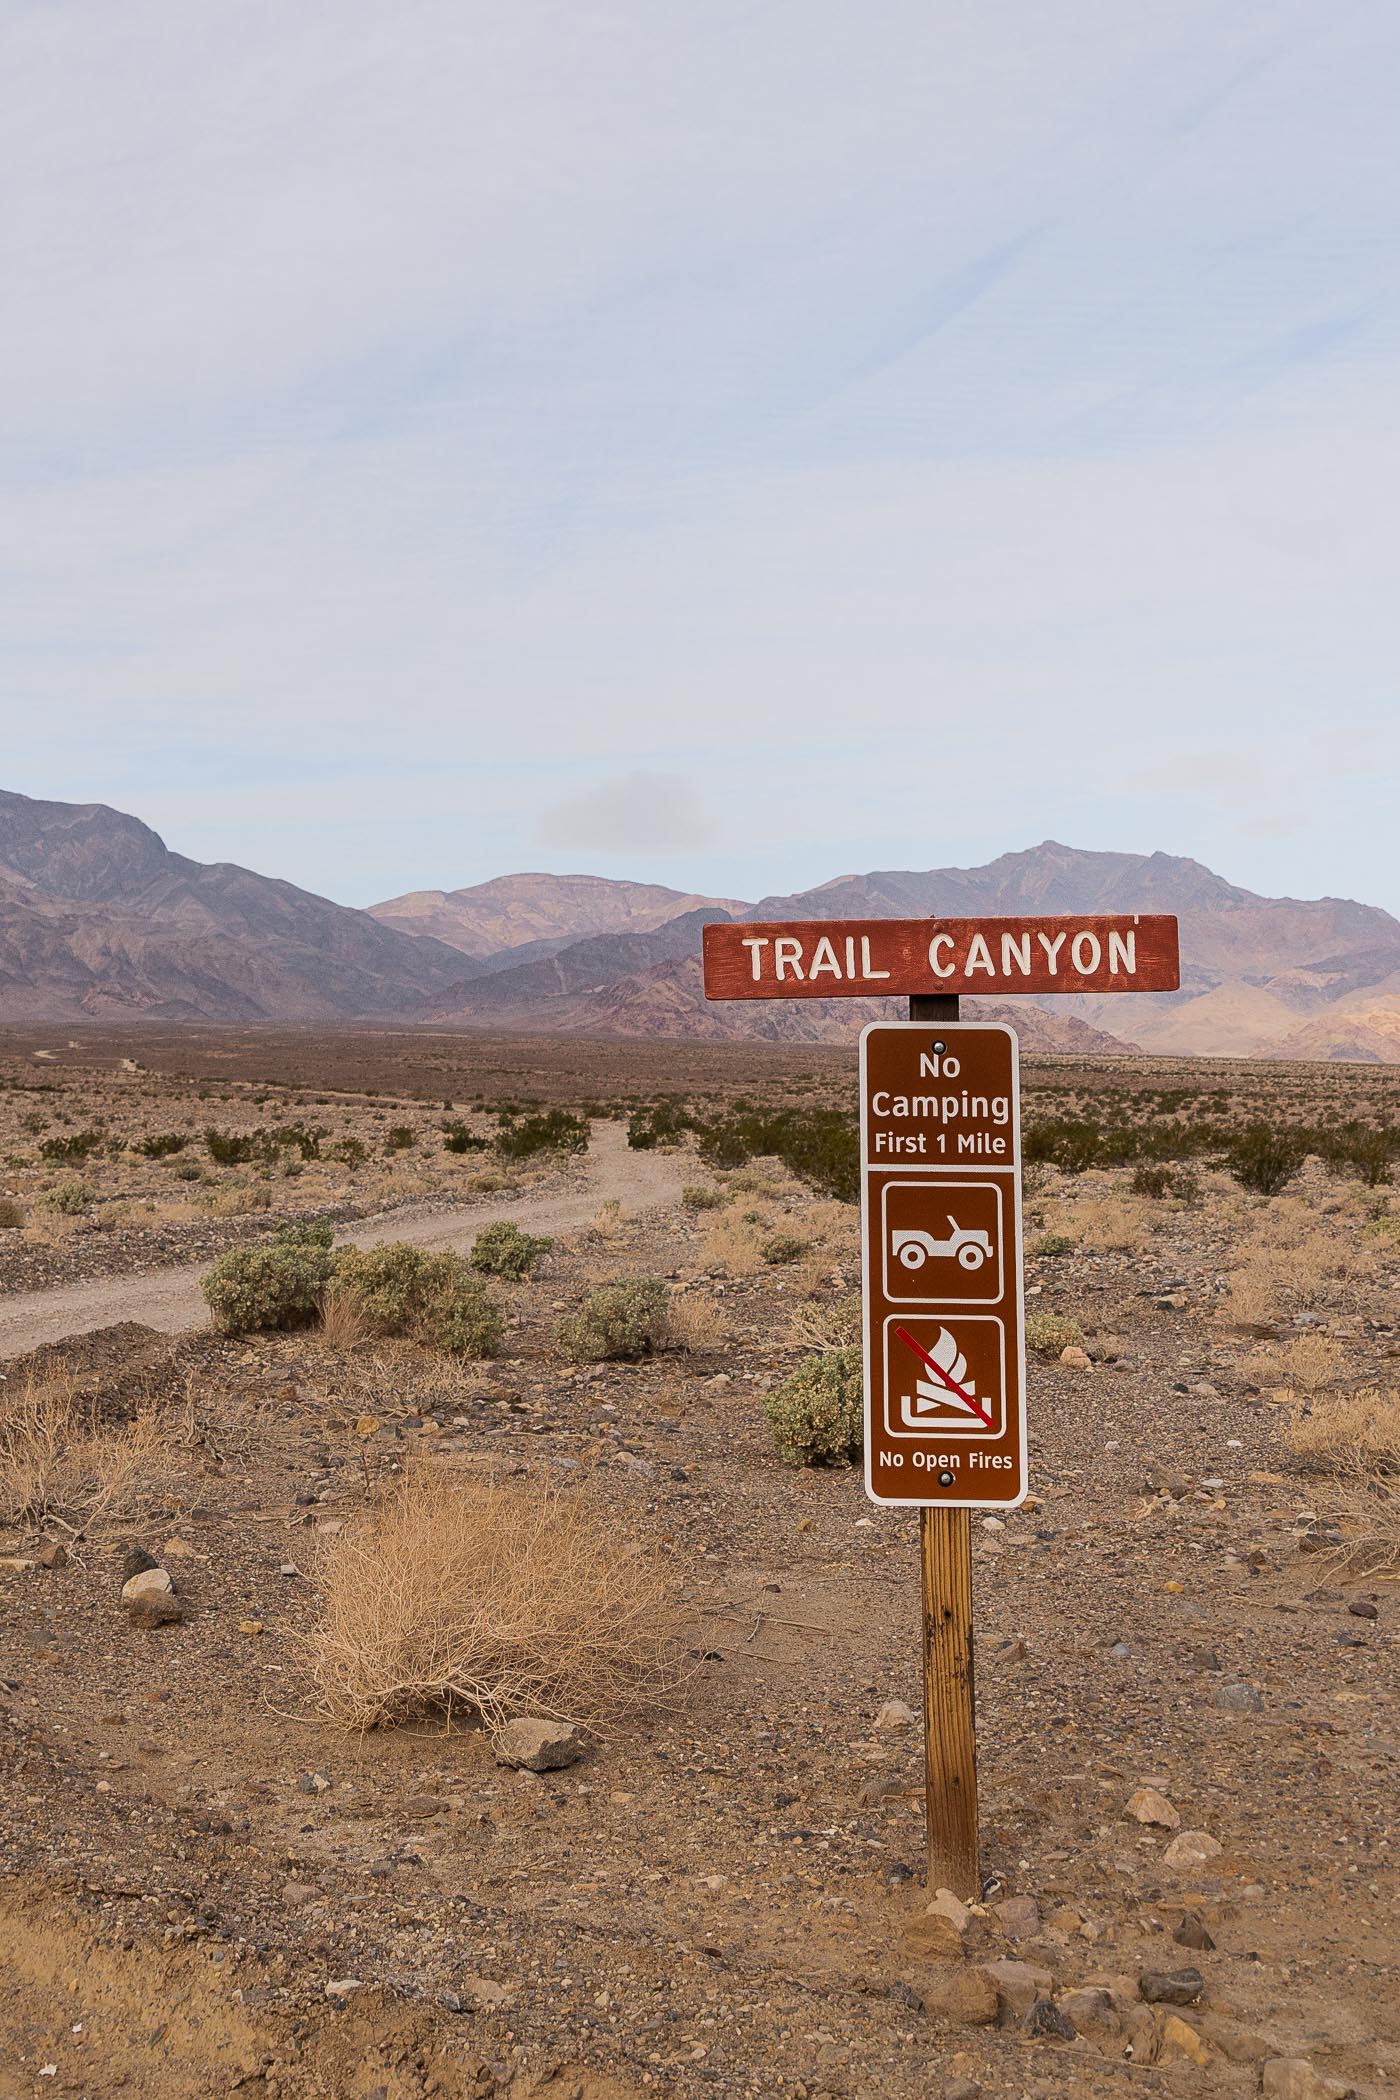 Overlanding 101 at Death Valley National Park - An out-of-this-world road trip through California